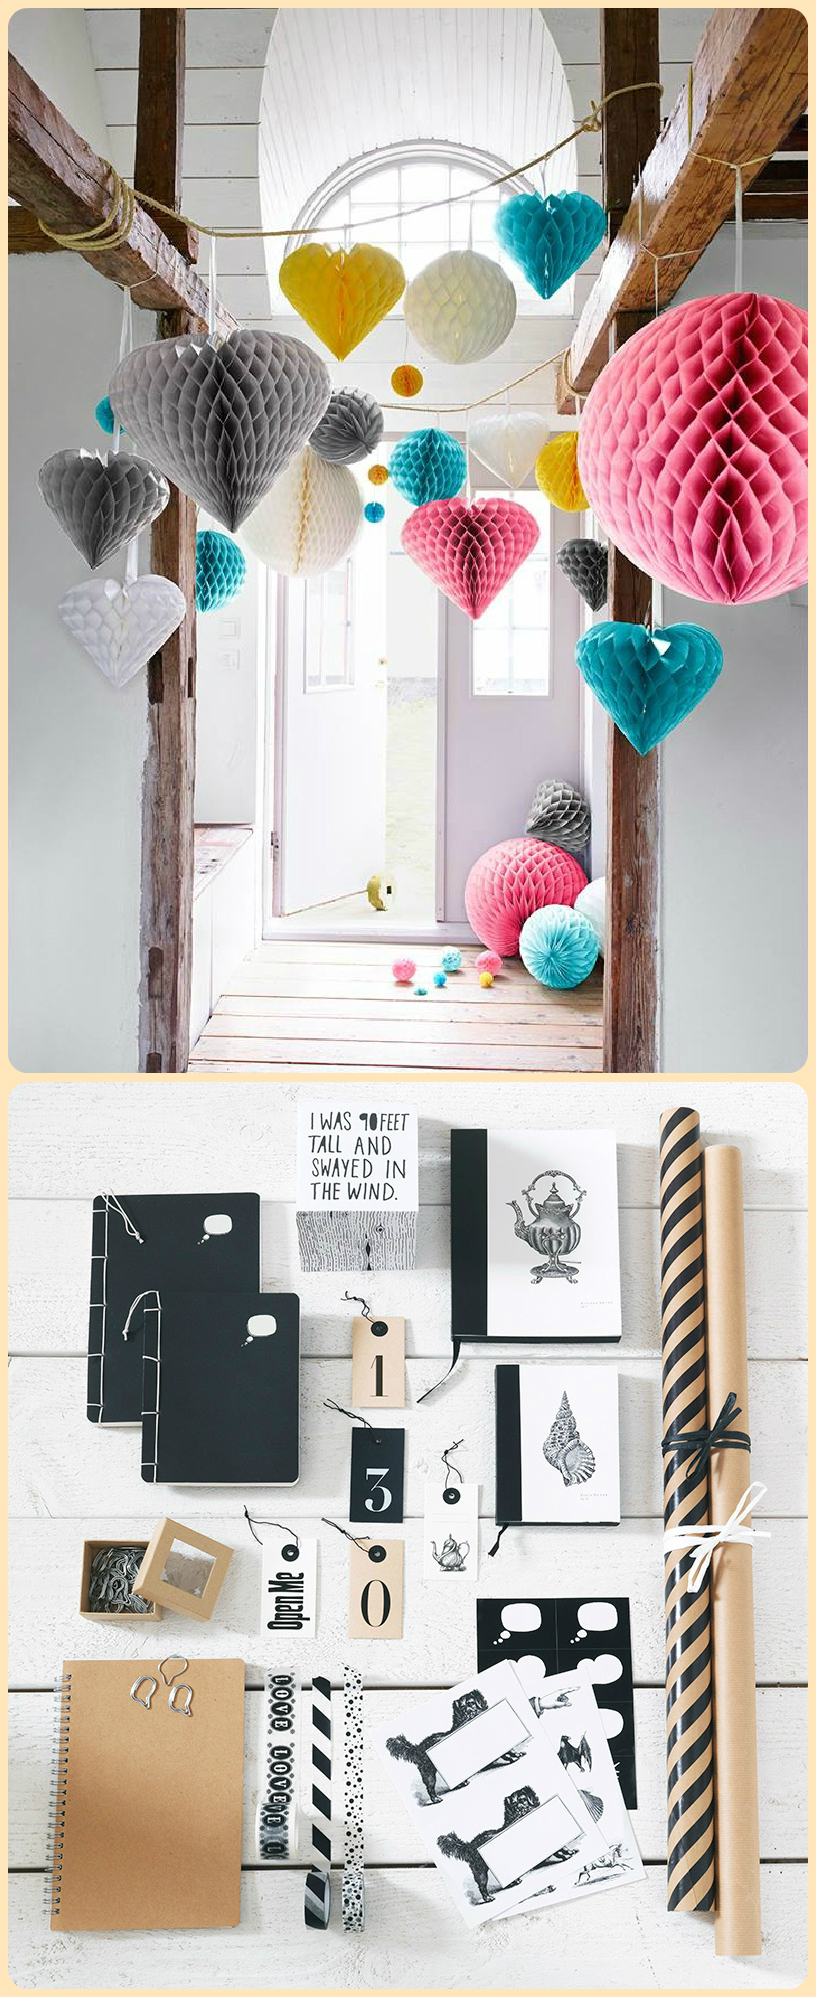 Baby shower decorations ideas